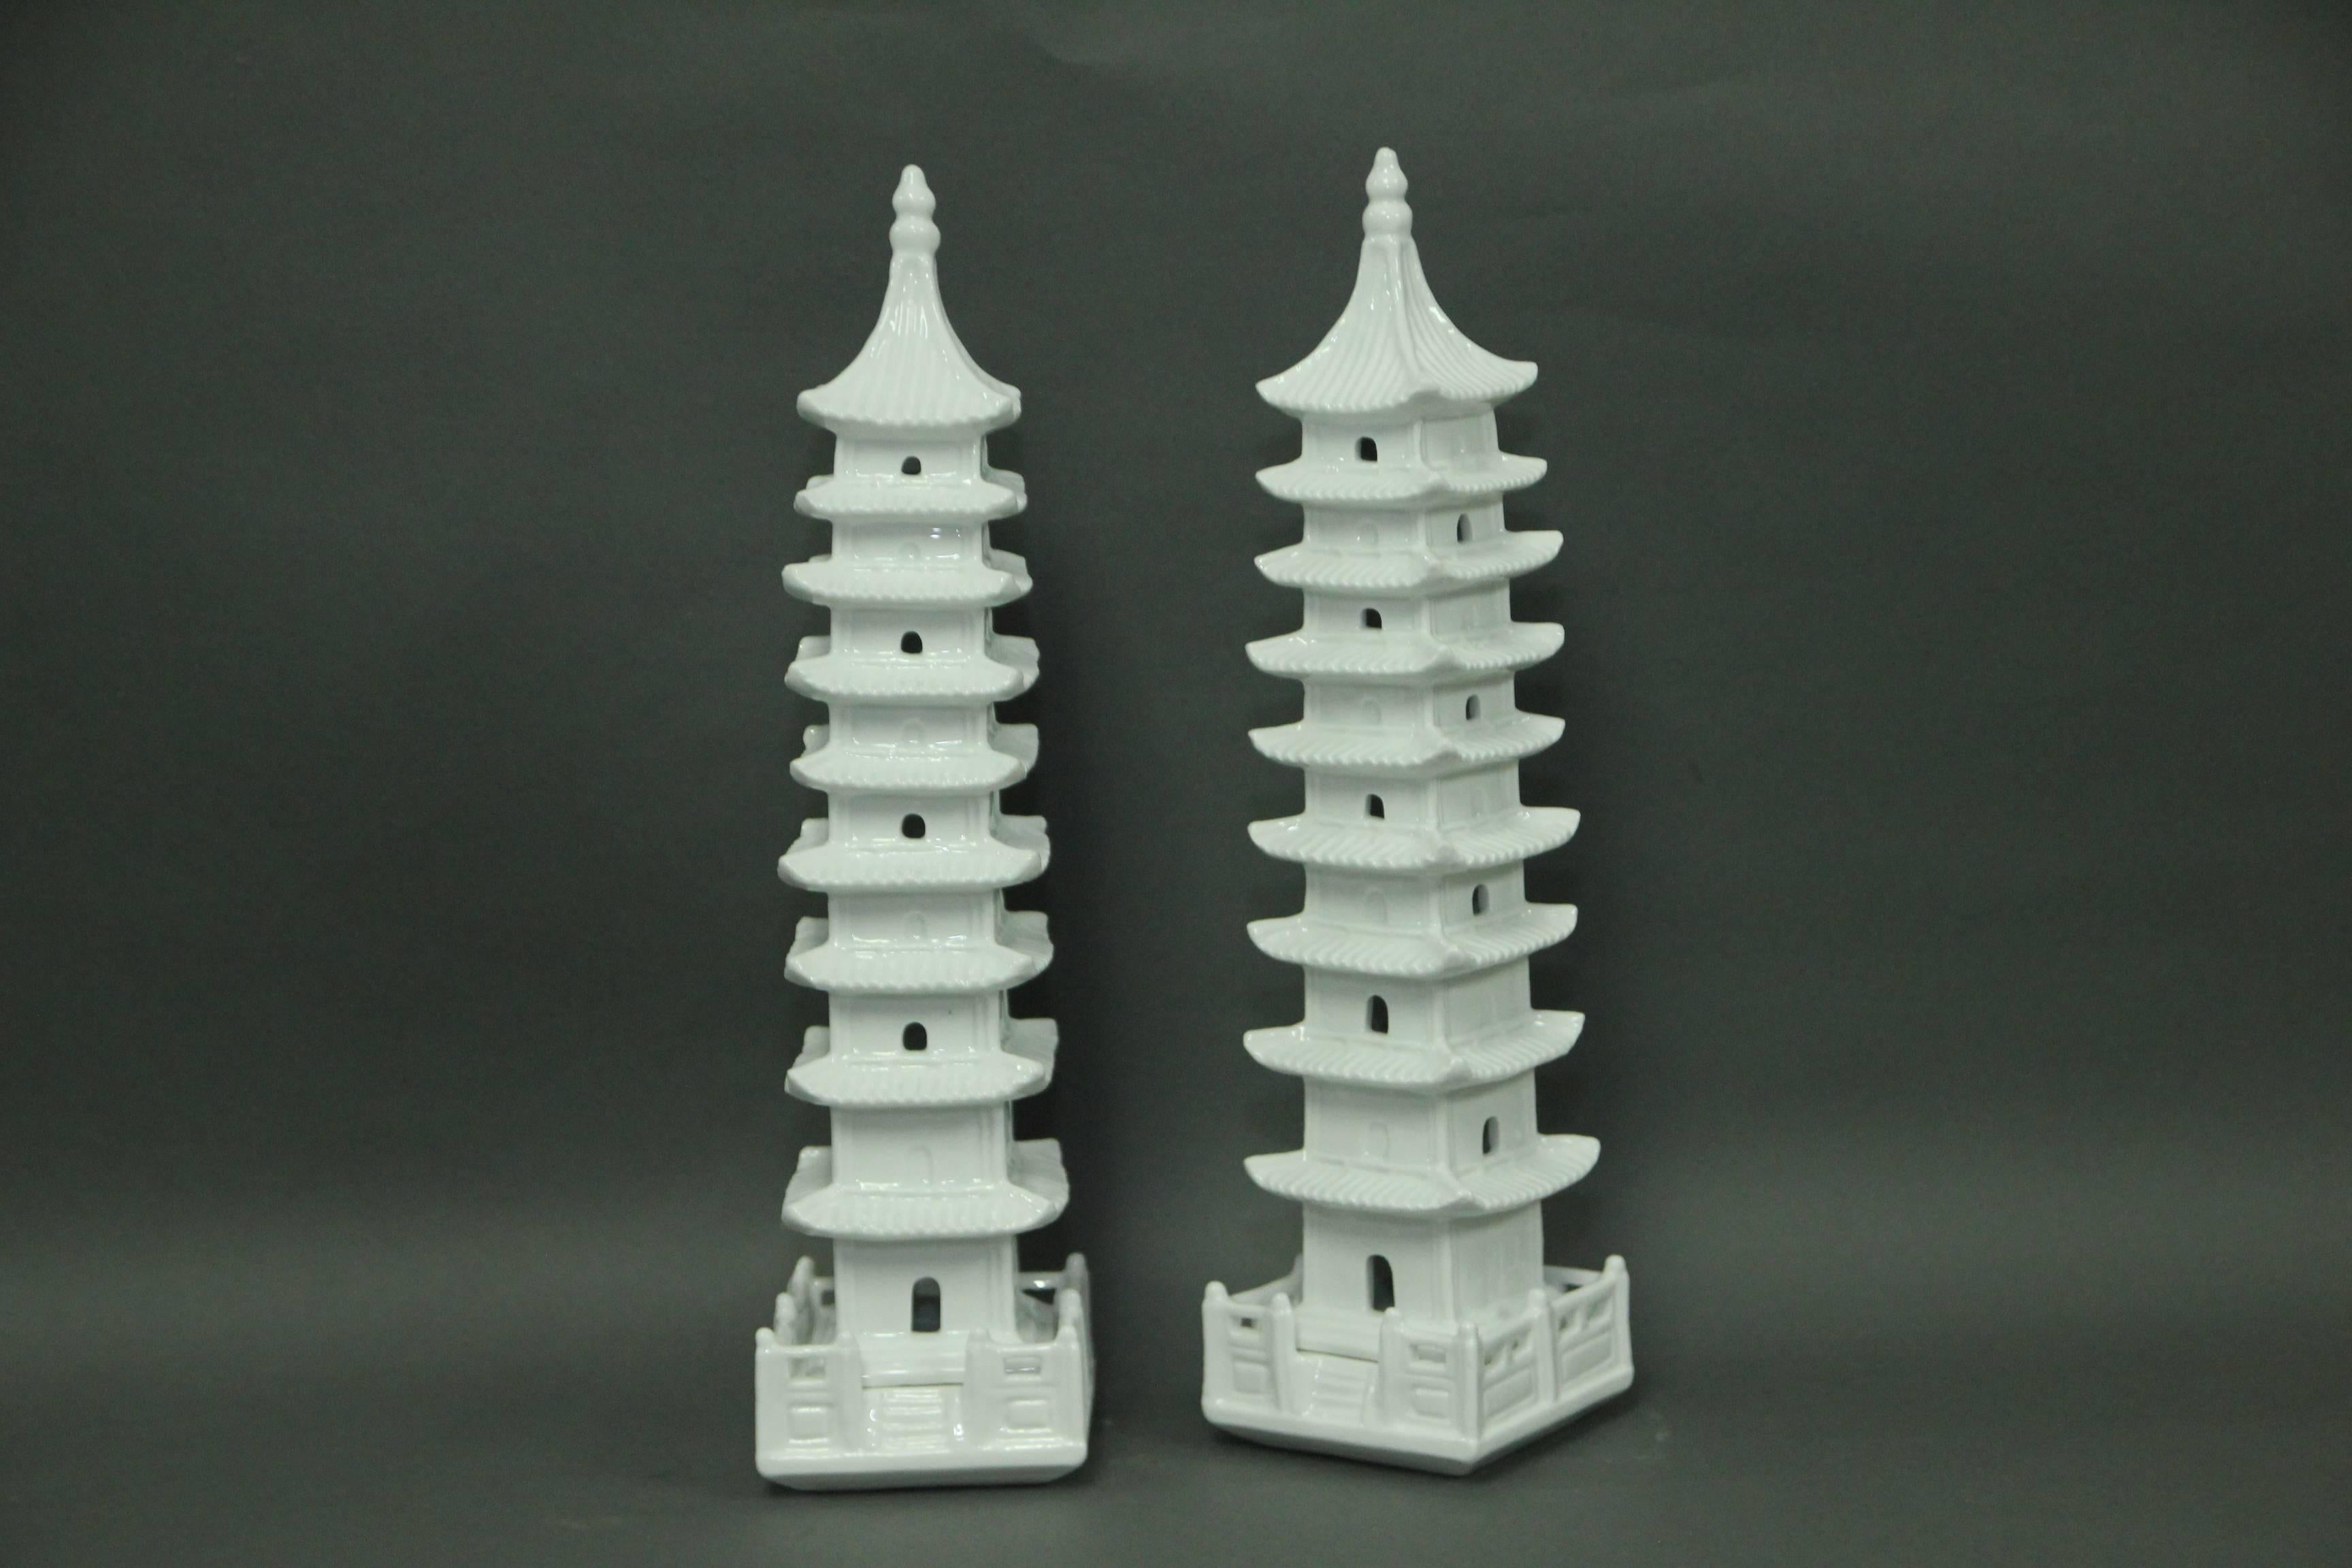 Pagodas are a form of Buddhist architecture. Before Buddhism was introduced to China from India, there had been no pagodas in China. The structures of pagodas are called stupa, meaning “accumulation, piling up of earth and rocks”, which signifies